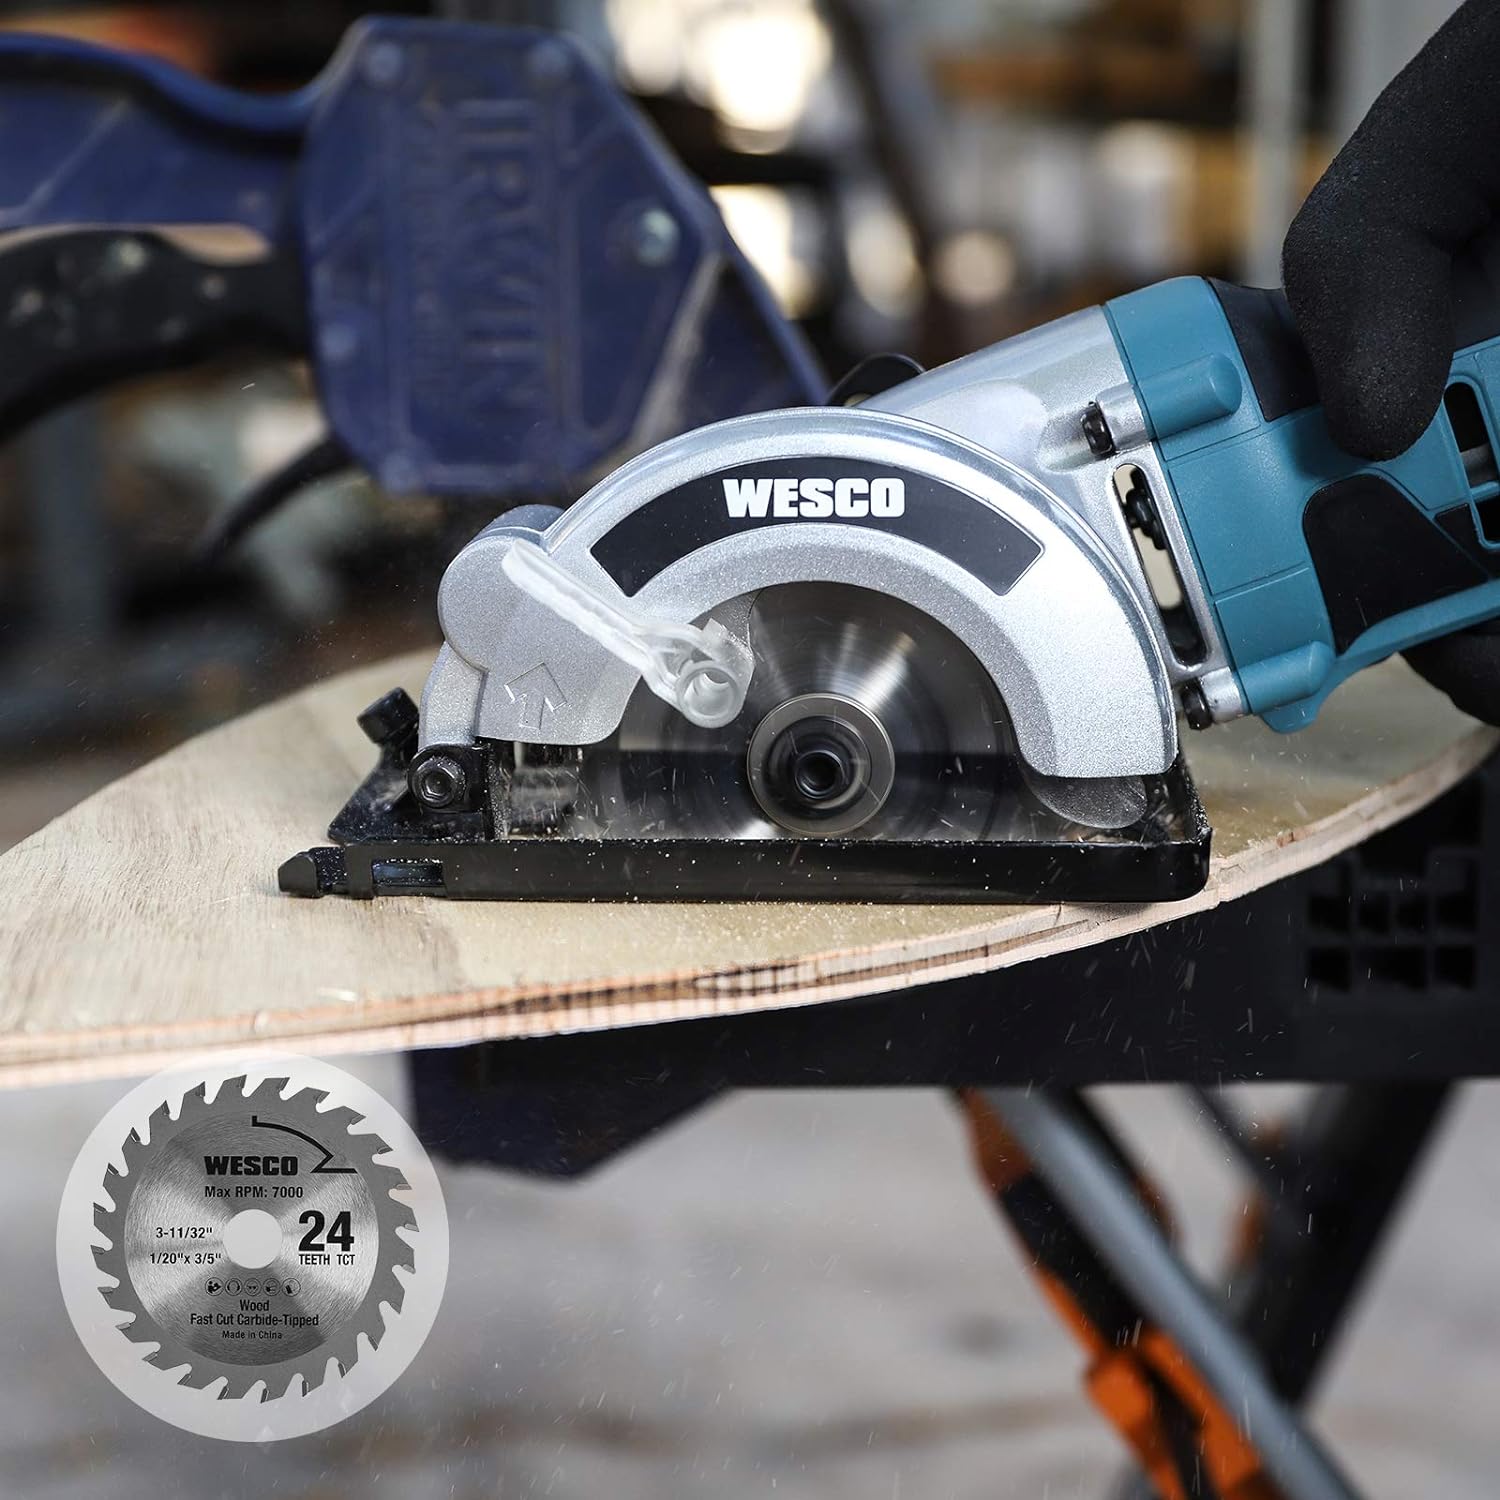 WESCO 3-3/8" Compact Circular Saw Blade Set, Arbor Size:3/5", Pack of 3-Pieces TCT/HSS/Diamond Saw Blades WS9801 for Worx WX420L & WX523L WESCO WS2978U 85mm Blade Set for Mini Saw